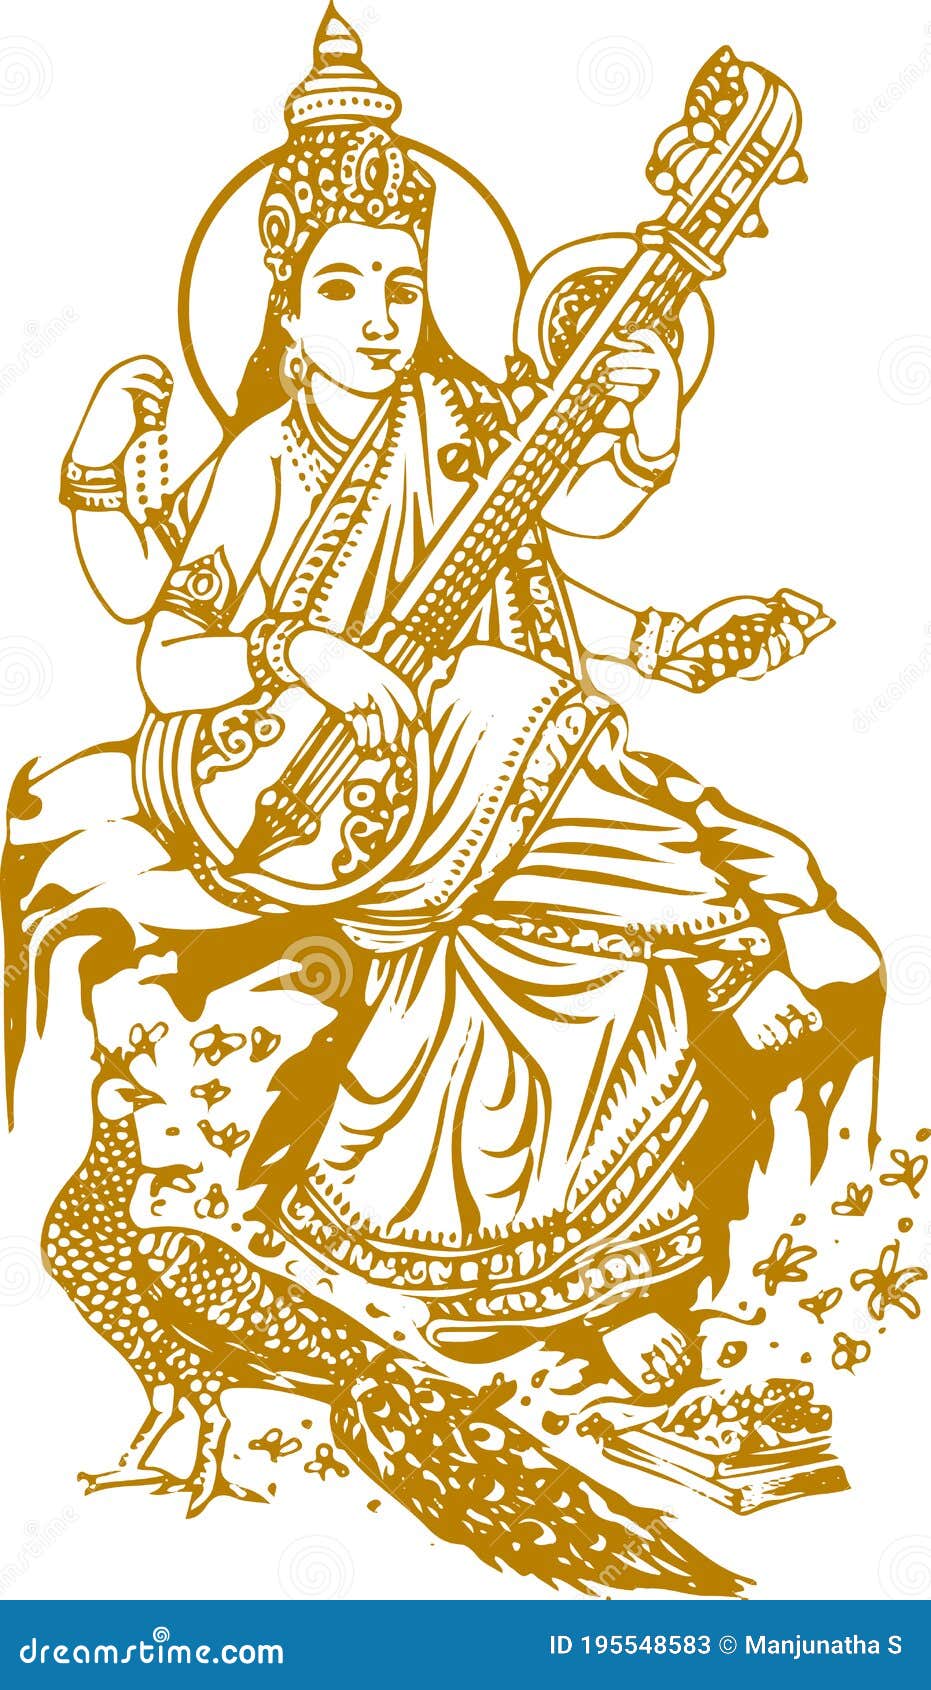 POSTERMALL Maa Saraswati Beautiful Sketch Photo Picture Large Poster Sl1546  (Large Poster, 36x24 Inches, Banner Media, Multicolor) : Amazon.in: Home &  Kitchen